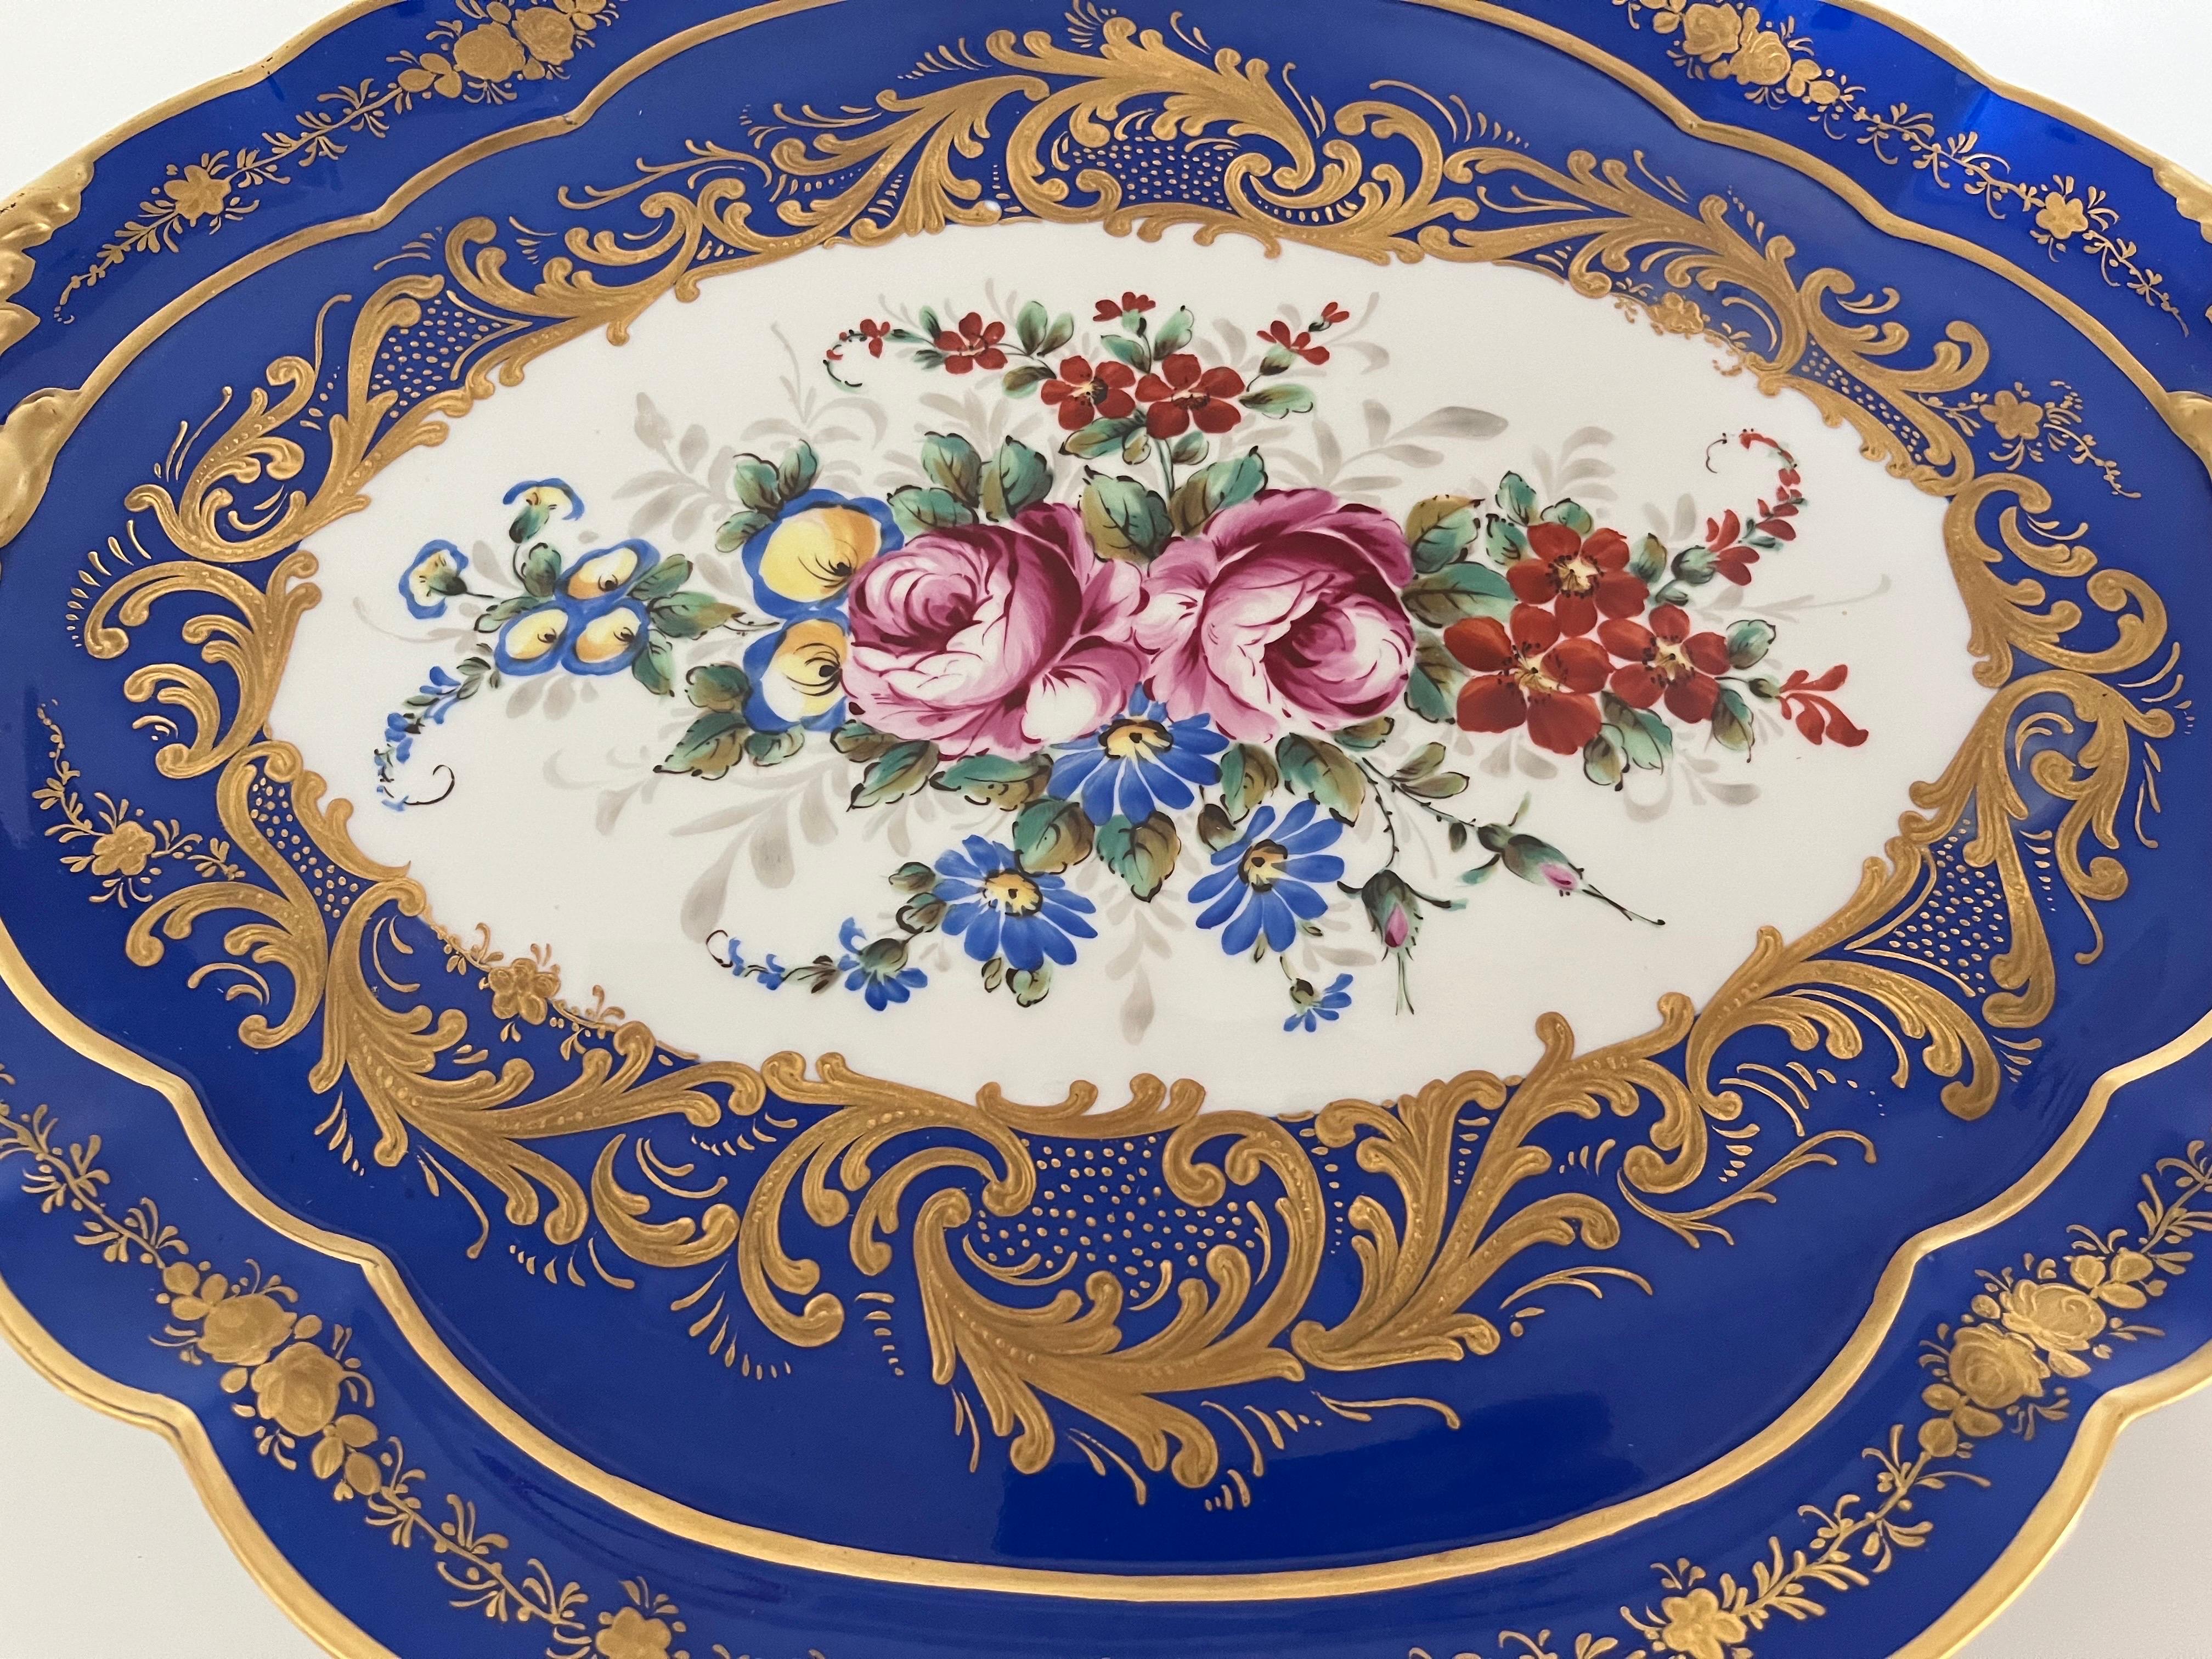 Early 20th Century Vassoio Blu Limoges France Decorato a mano del '900 -Antiques- For Sale